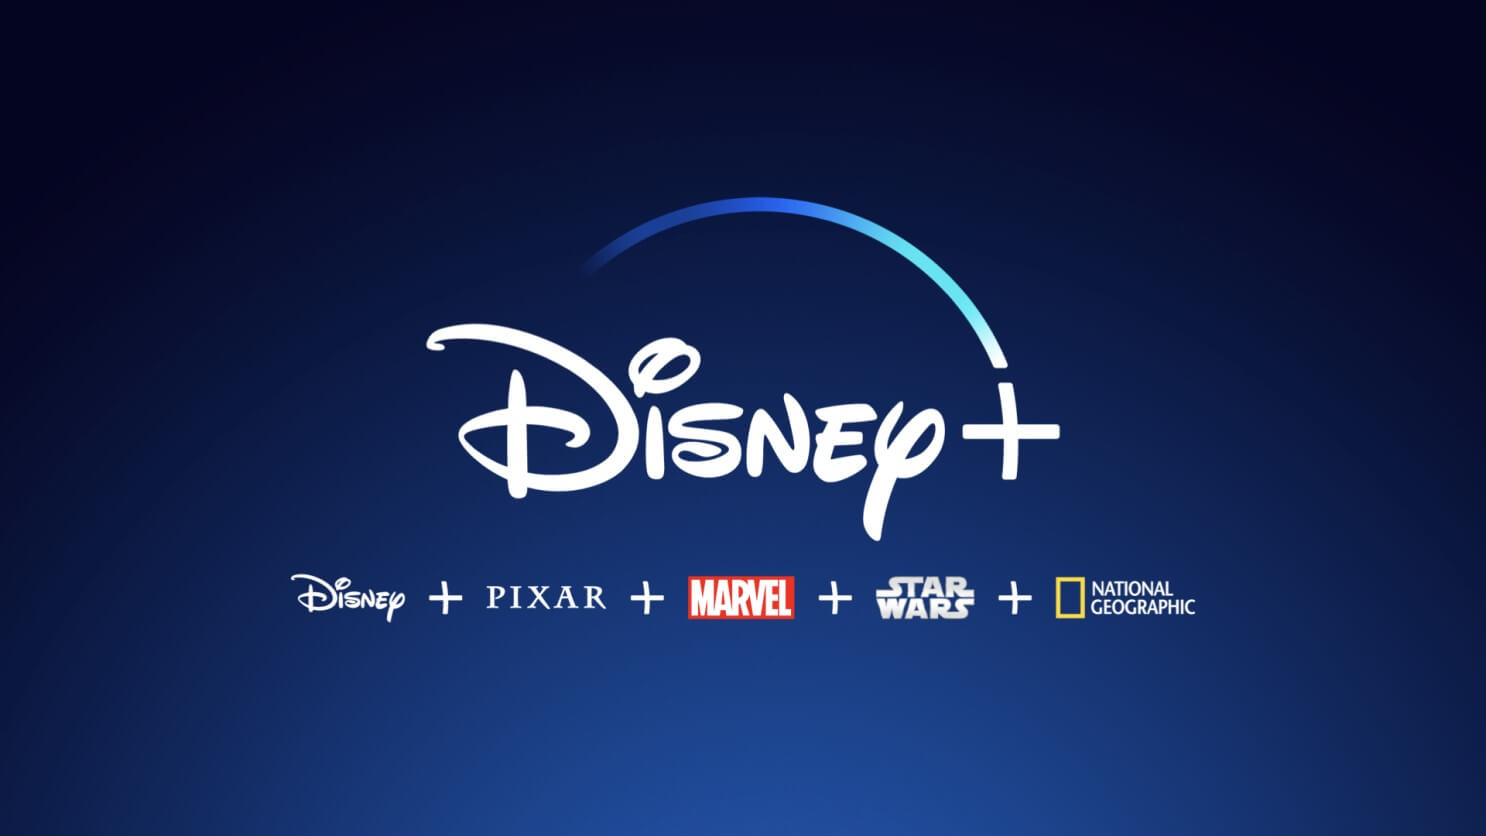 Disney+ is Making Wednesday The New Friday